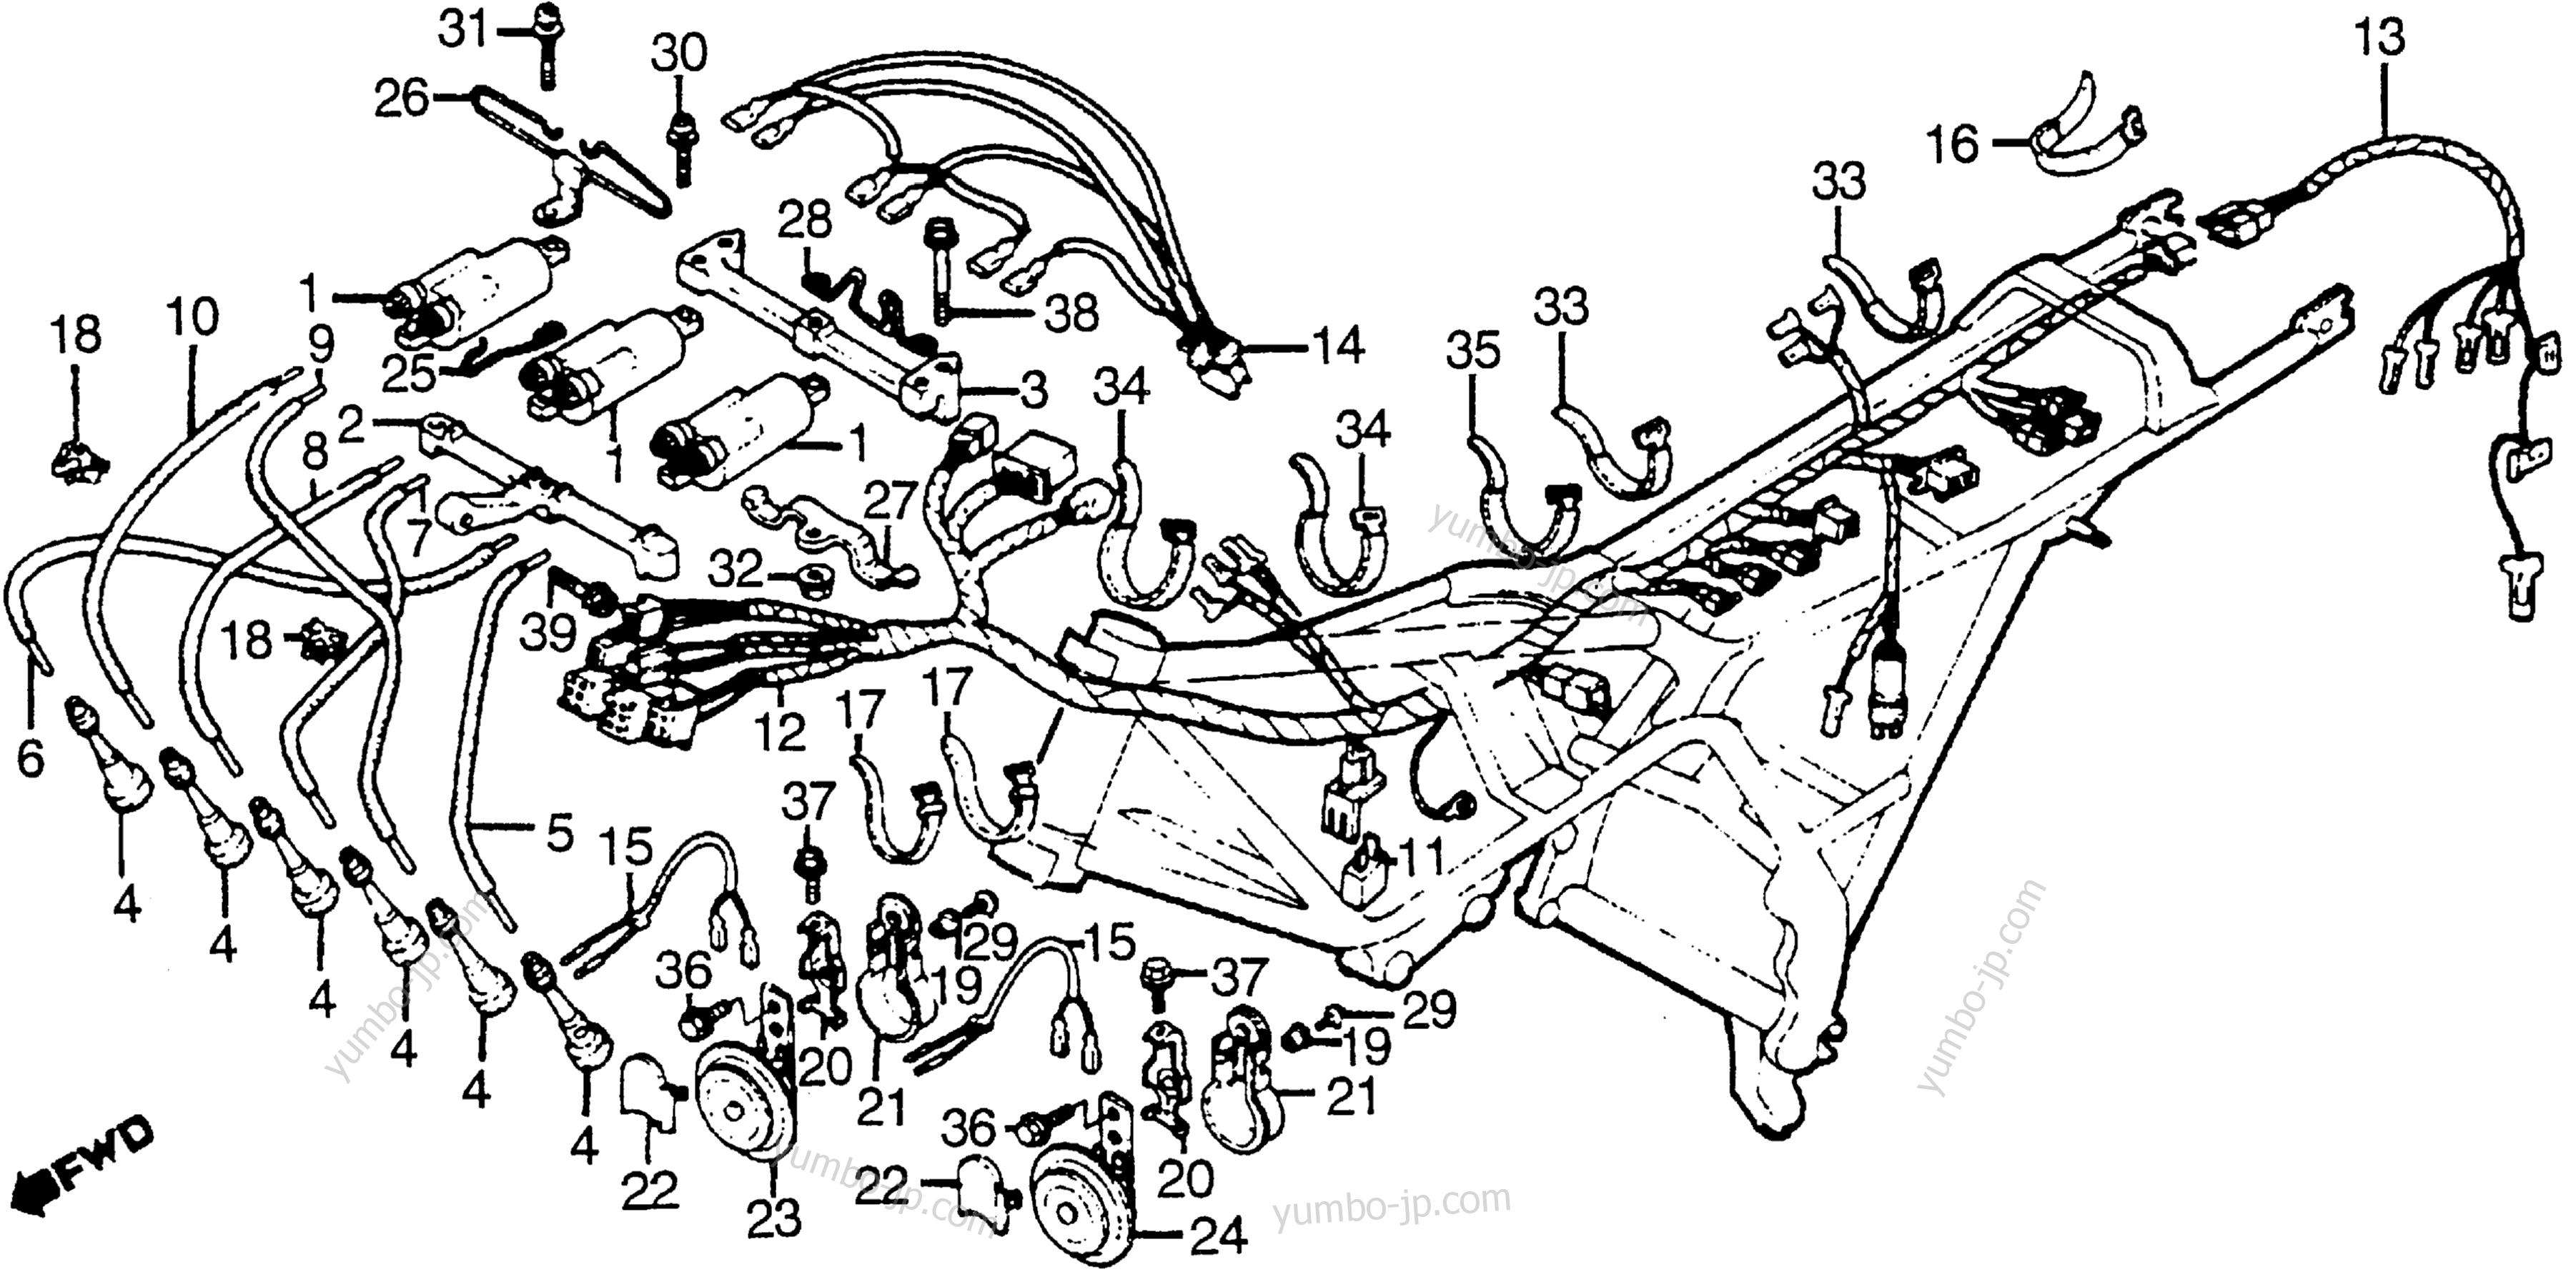 WIRE HARNESS for motorcycles HONDA CBX A 1982 year